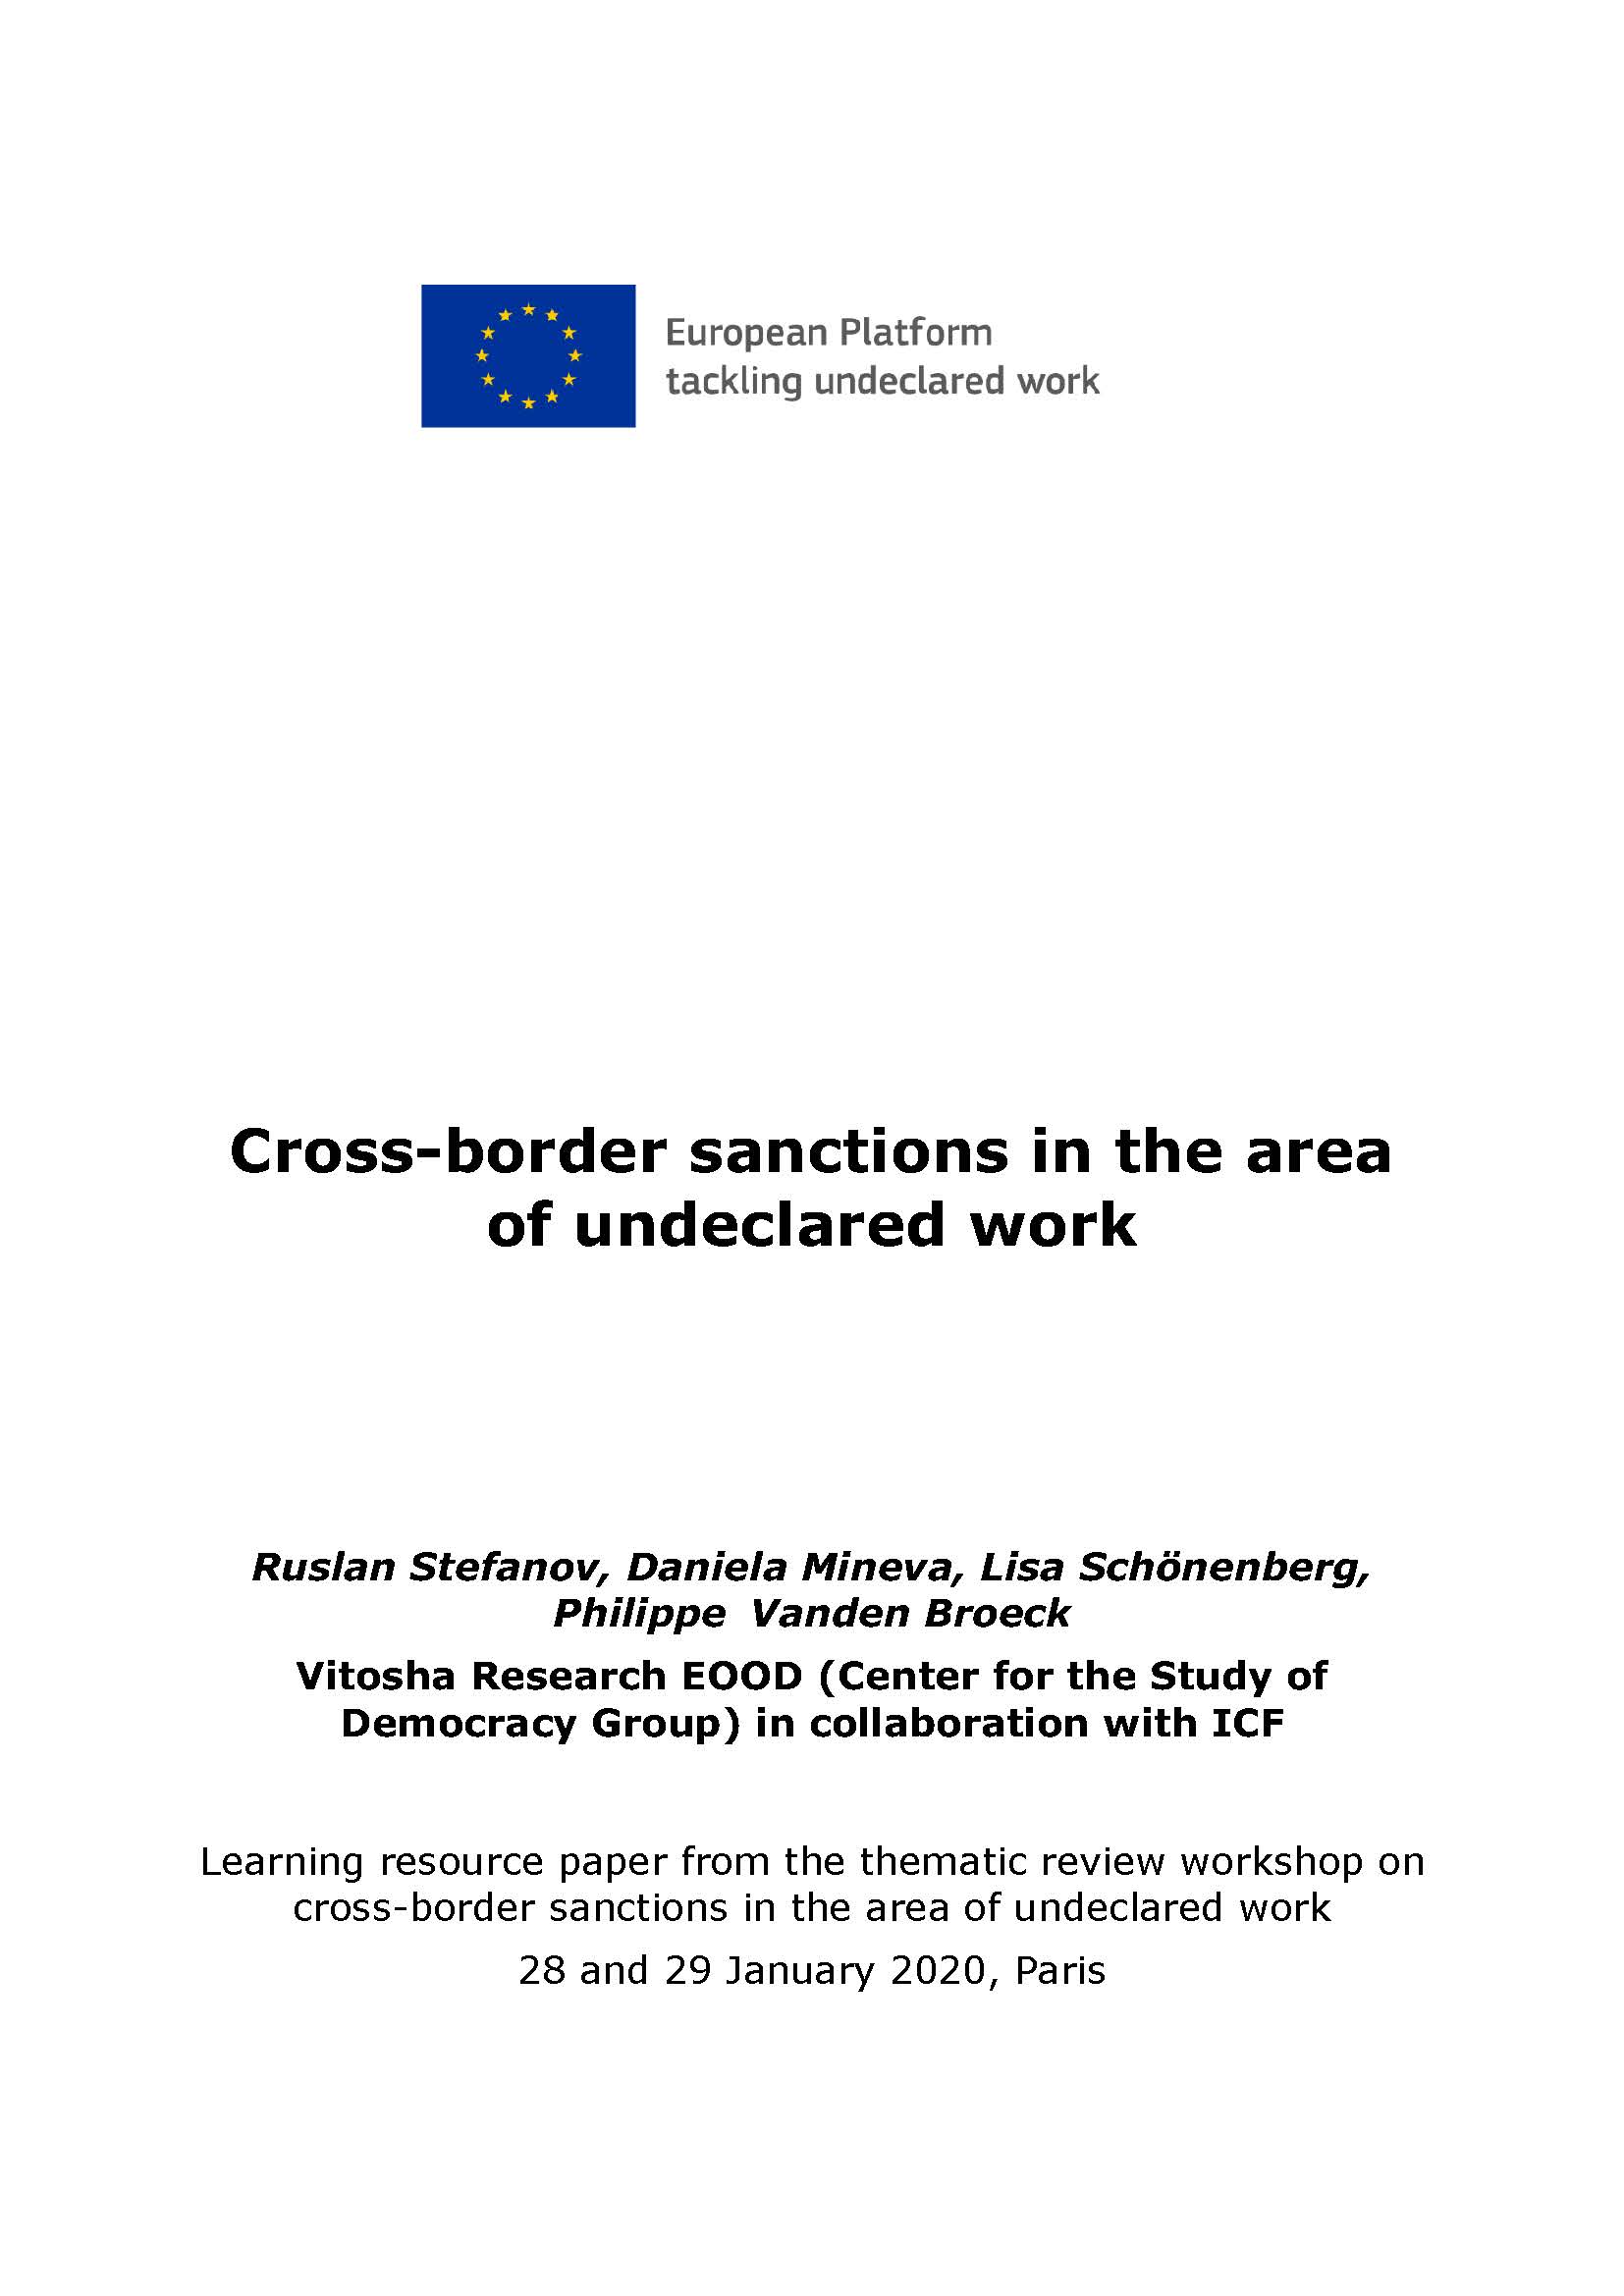 Cross-border sanctions in the area of undeclared work